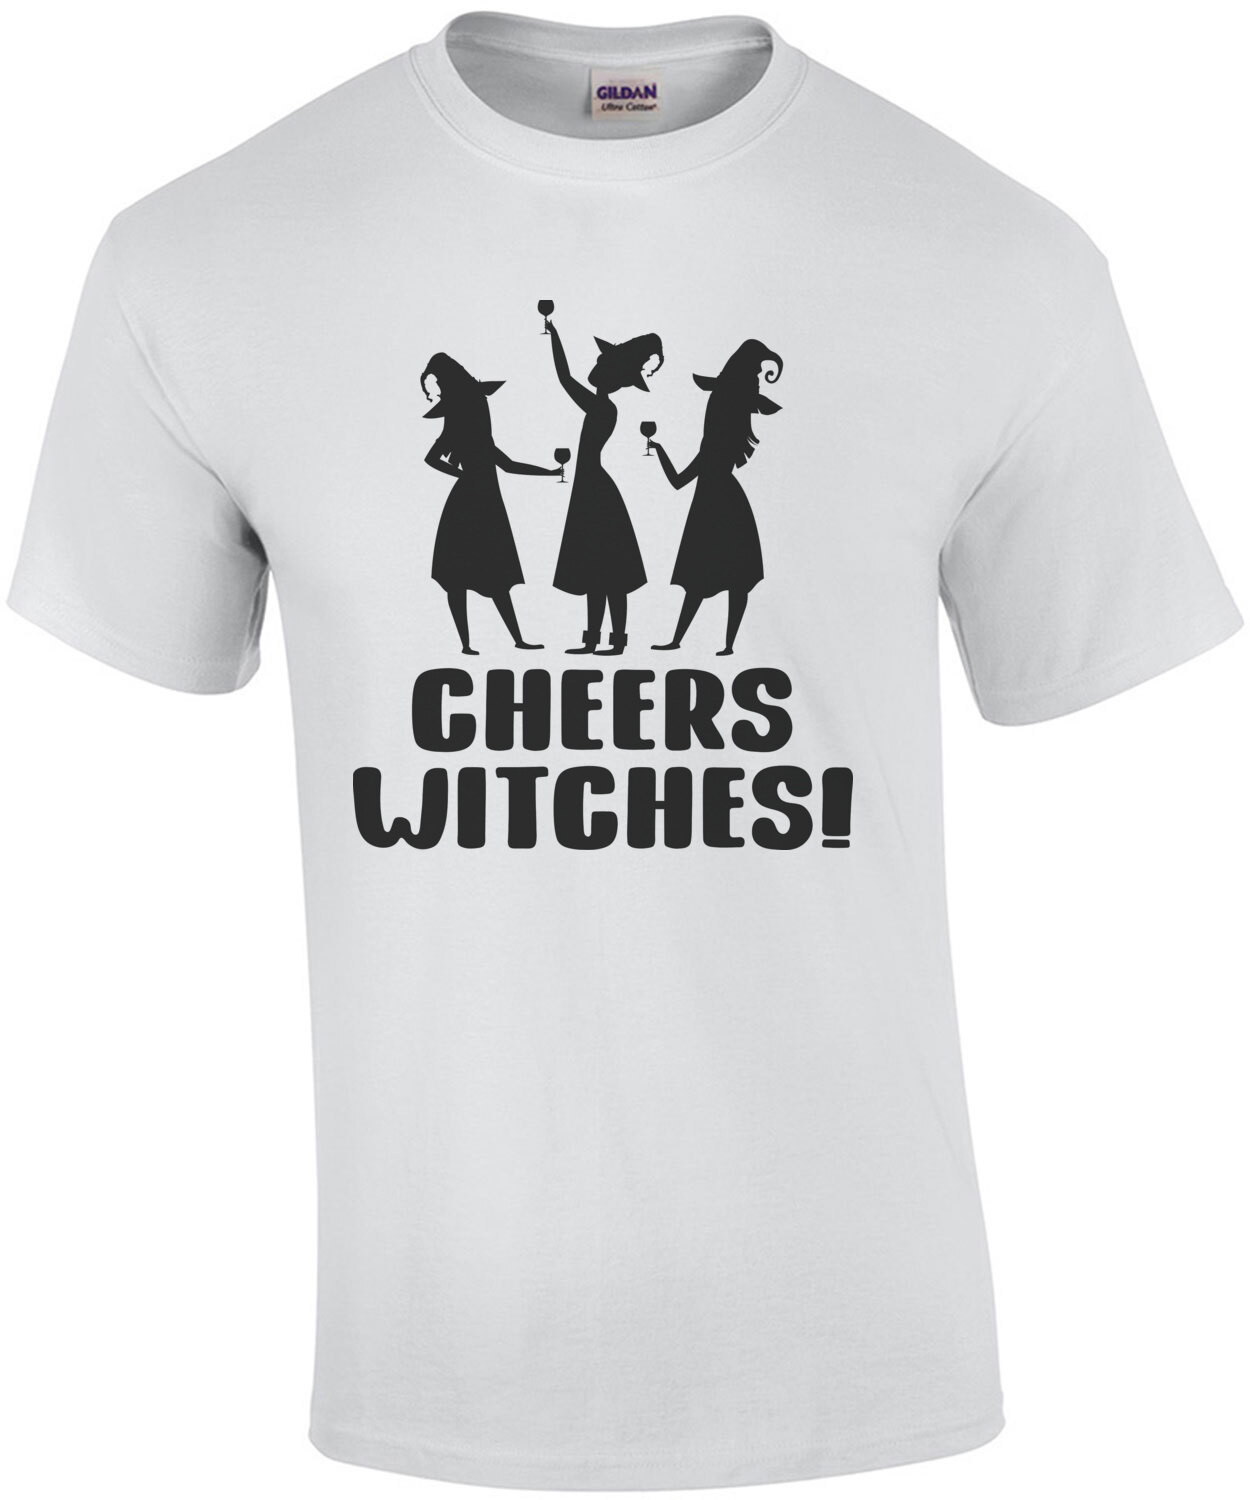 Cheers Witches - Halloween Shirt For Drinkers